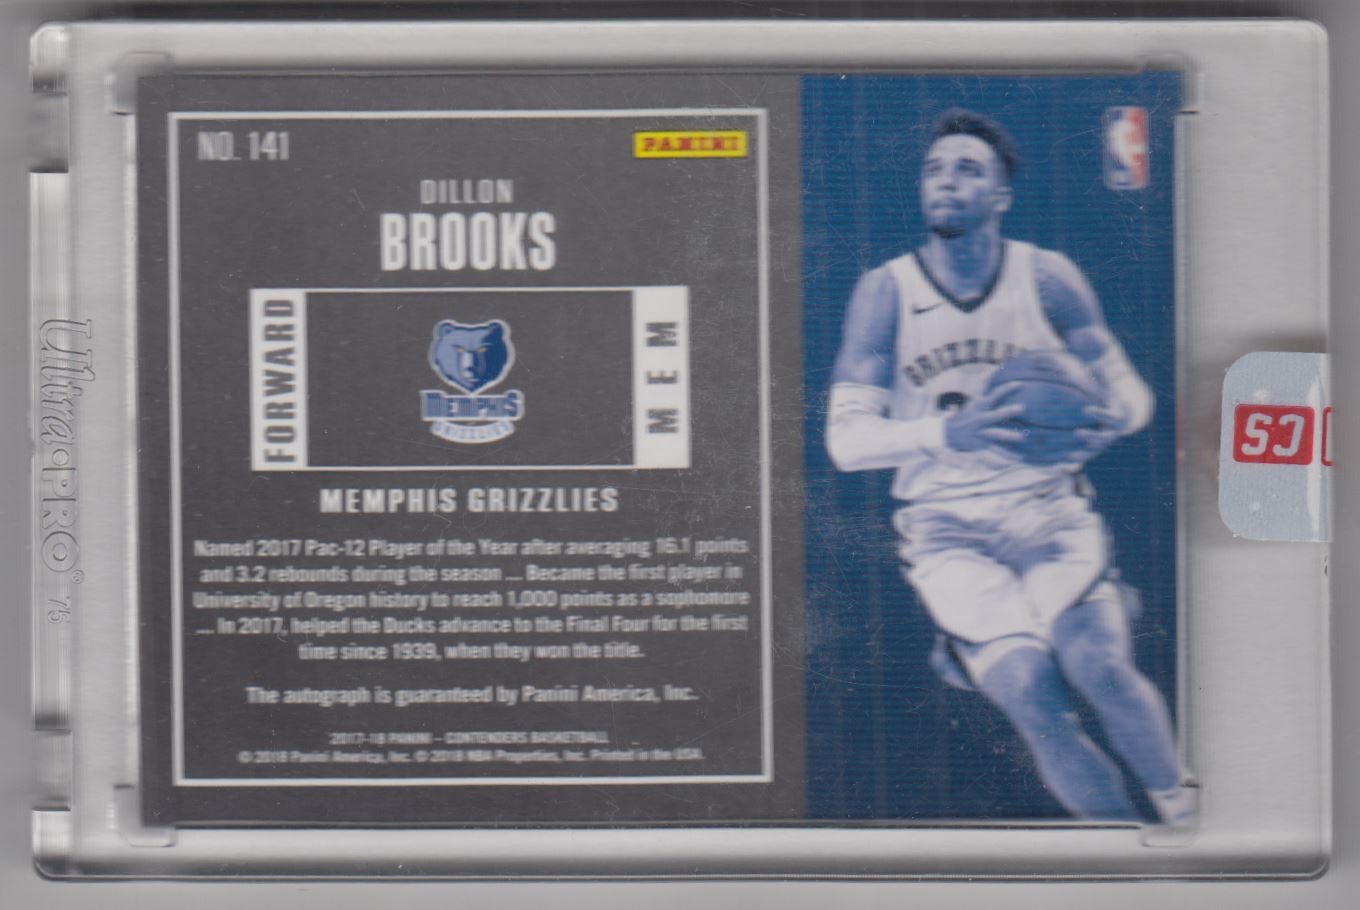 2017-18 Panini Contenders Cracked Ice Ticket #141B Dillon Brooks AU VAR/20 EXCH back image